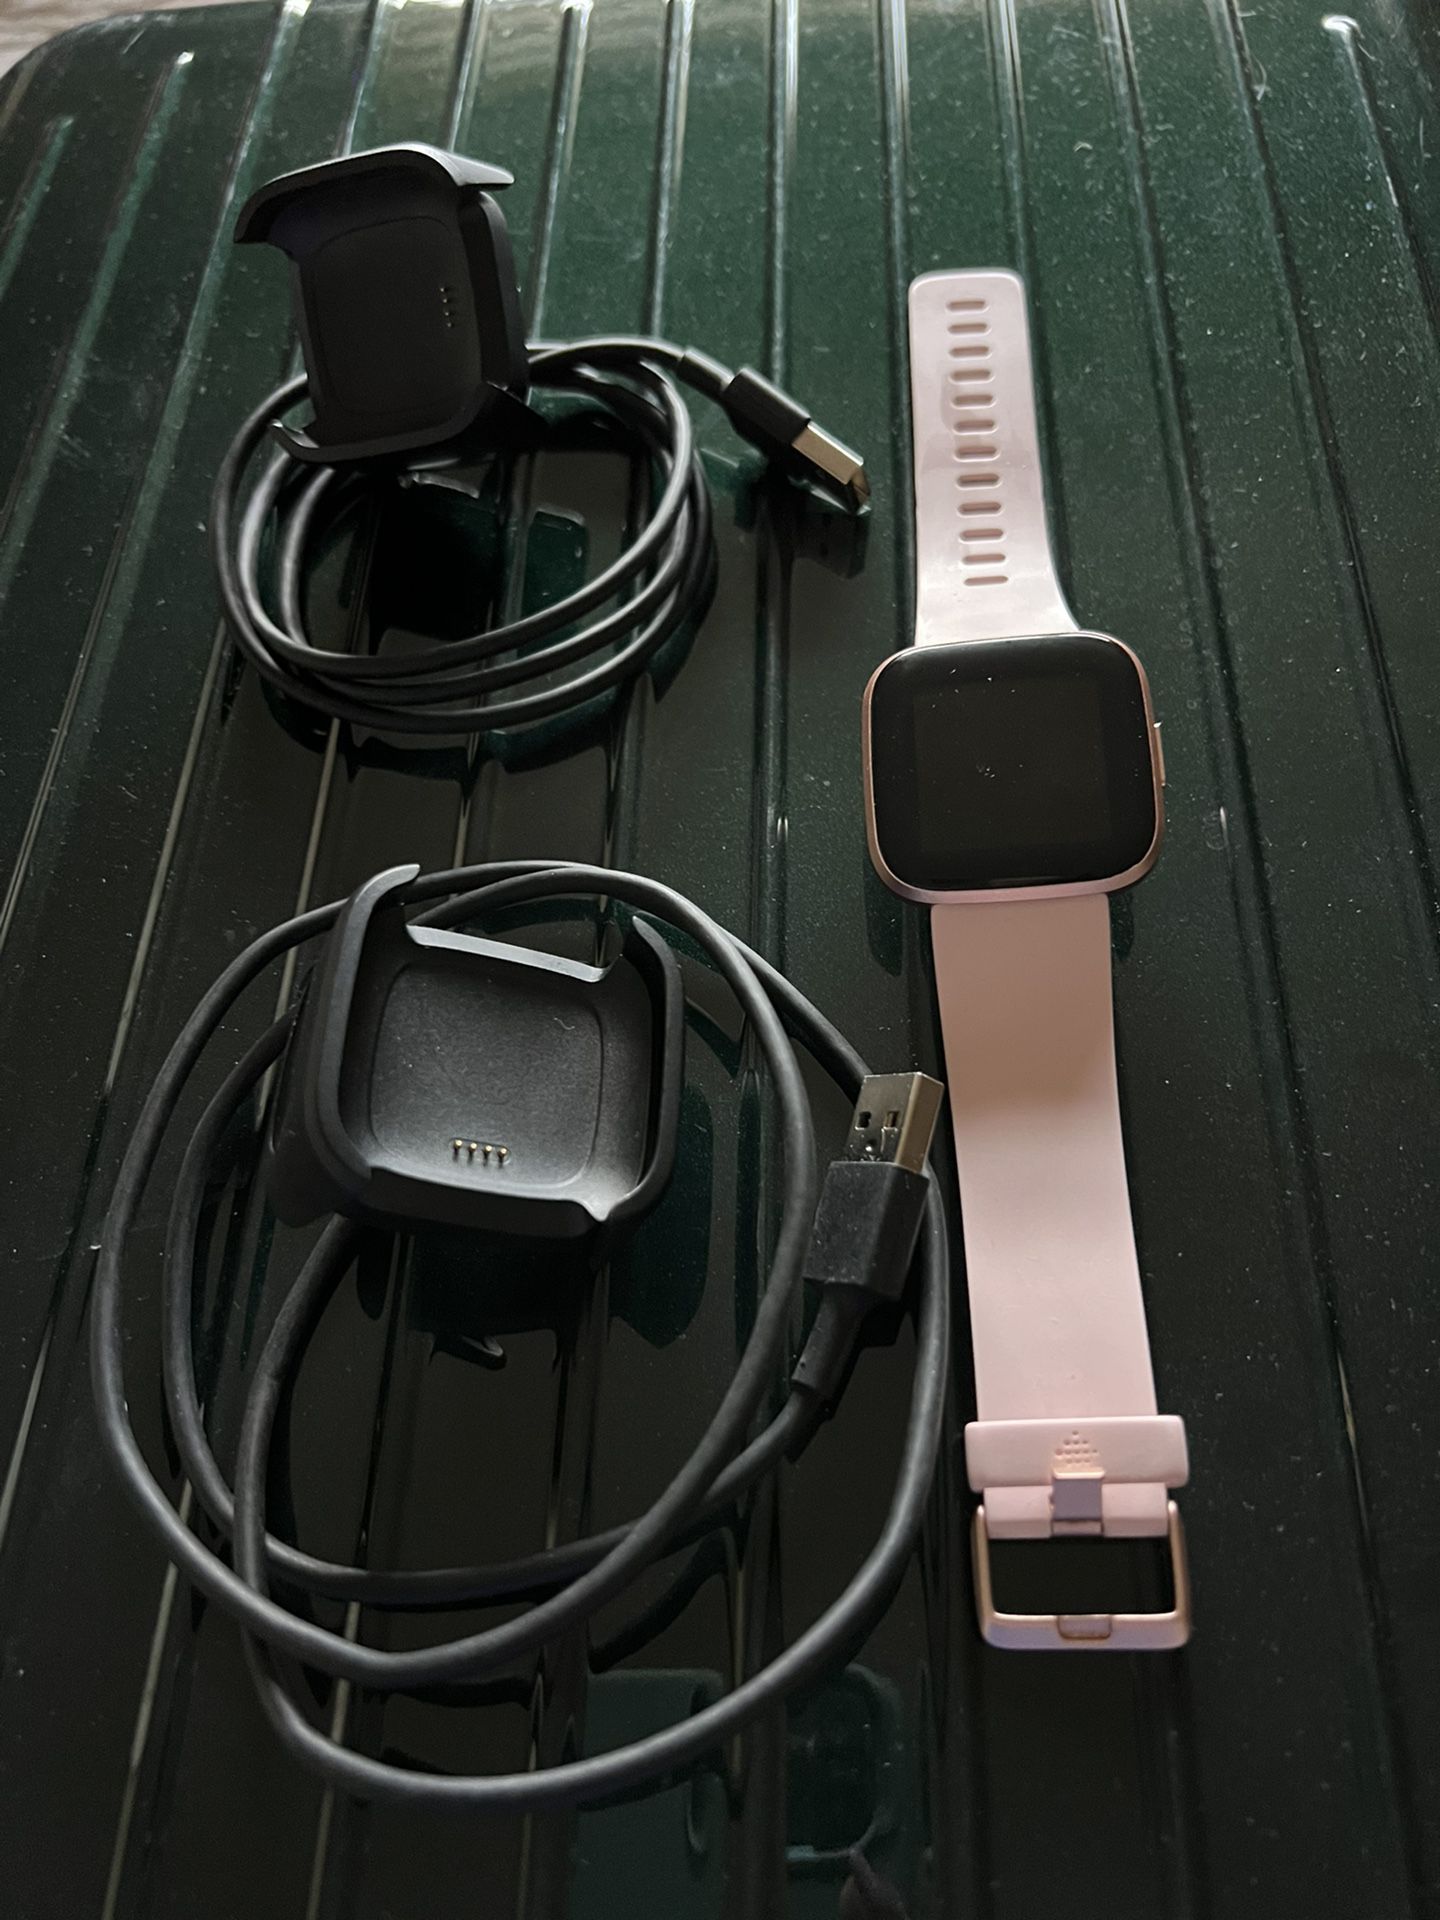 Fitbit Versa 2 With 2 Charging Cables